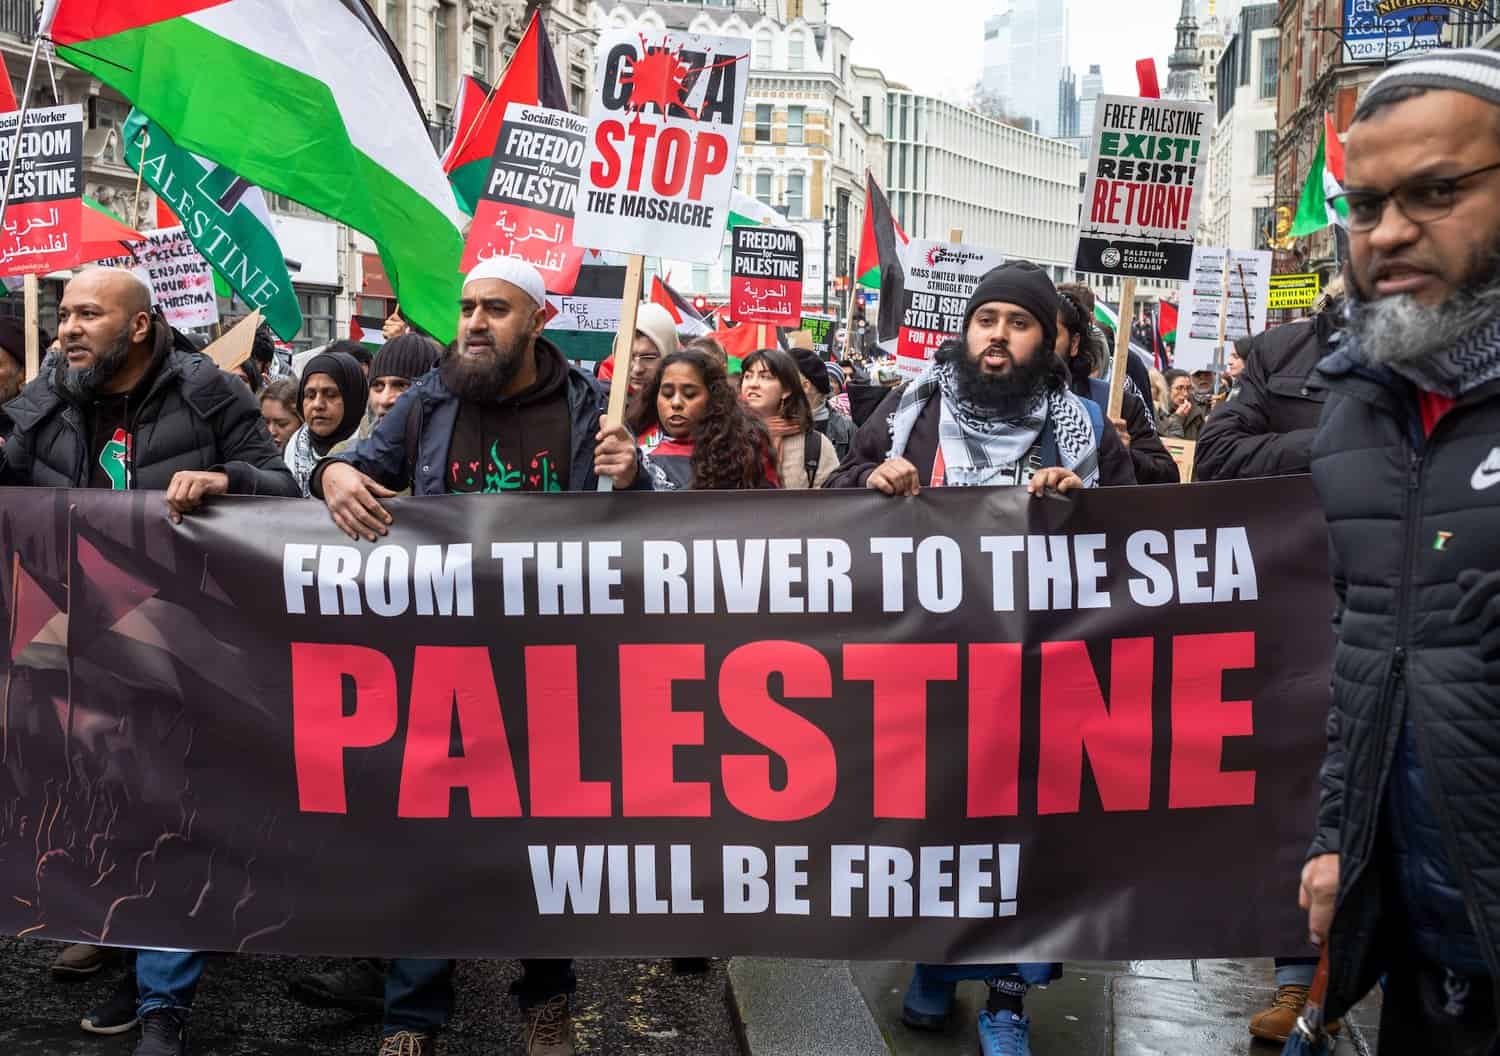 Protestors in London raise a banner reading "From the river to the sea, Palestine will be free" and call for an end to Israeli attacks on Gaza (December 9, 2023) | Andy Soloman / Shutterstock